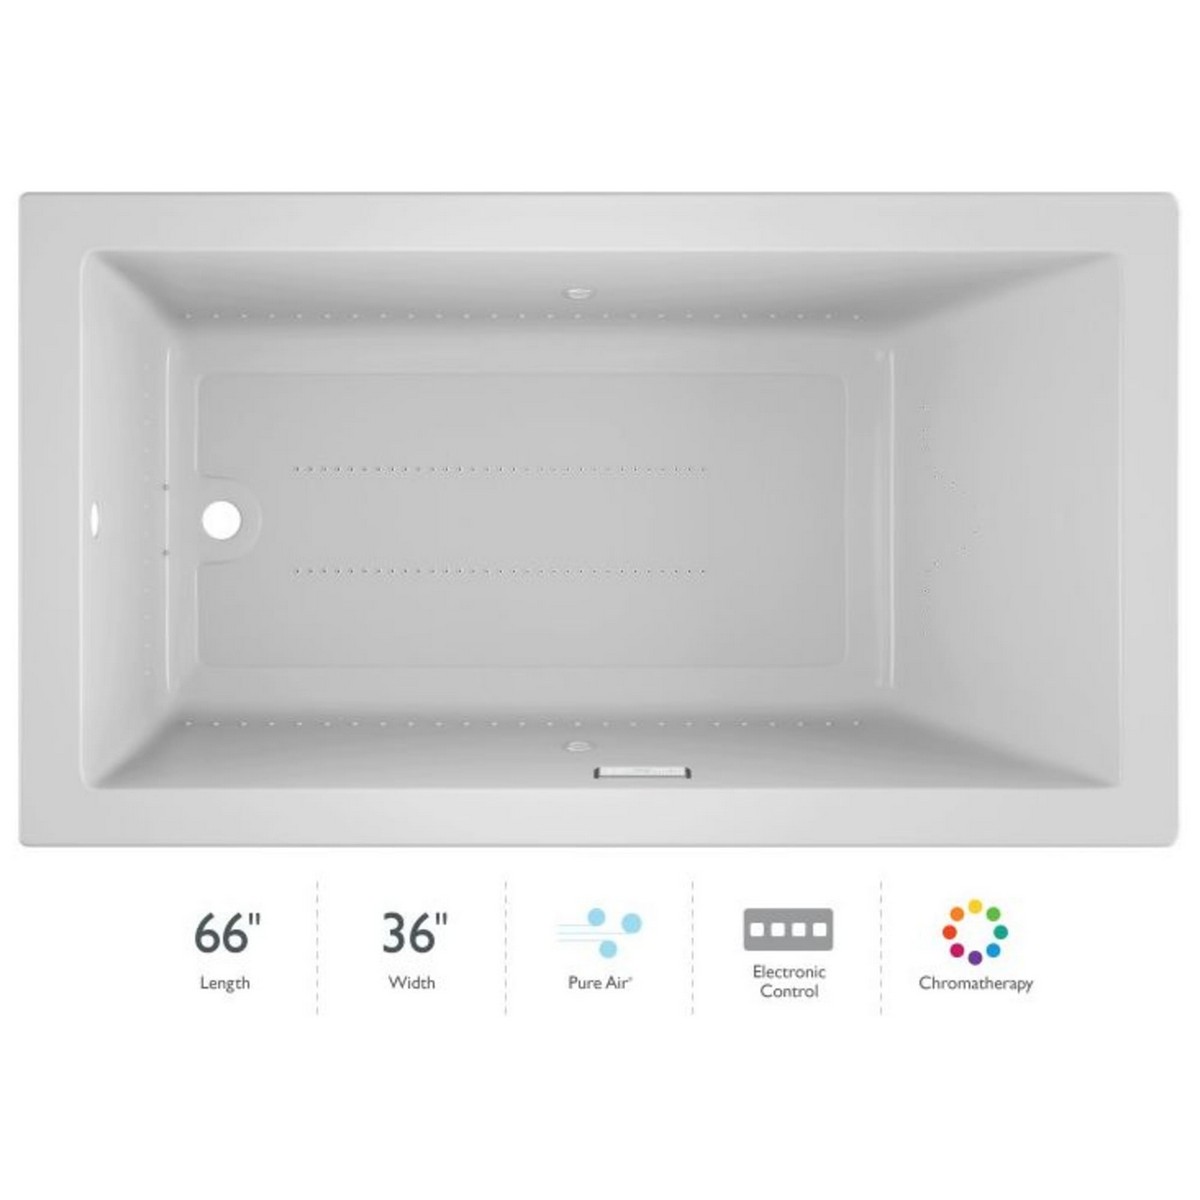 JACUZZI SOL6636A SOLNA 66 X 36 INCH ACRYLIC DROP-IN OR UNDERMOUNT PURE AIR BATHTUB WITH LUXURY CONTROLS AND CHROMATHERAPY